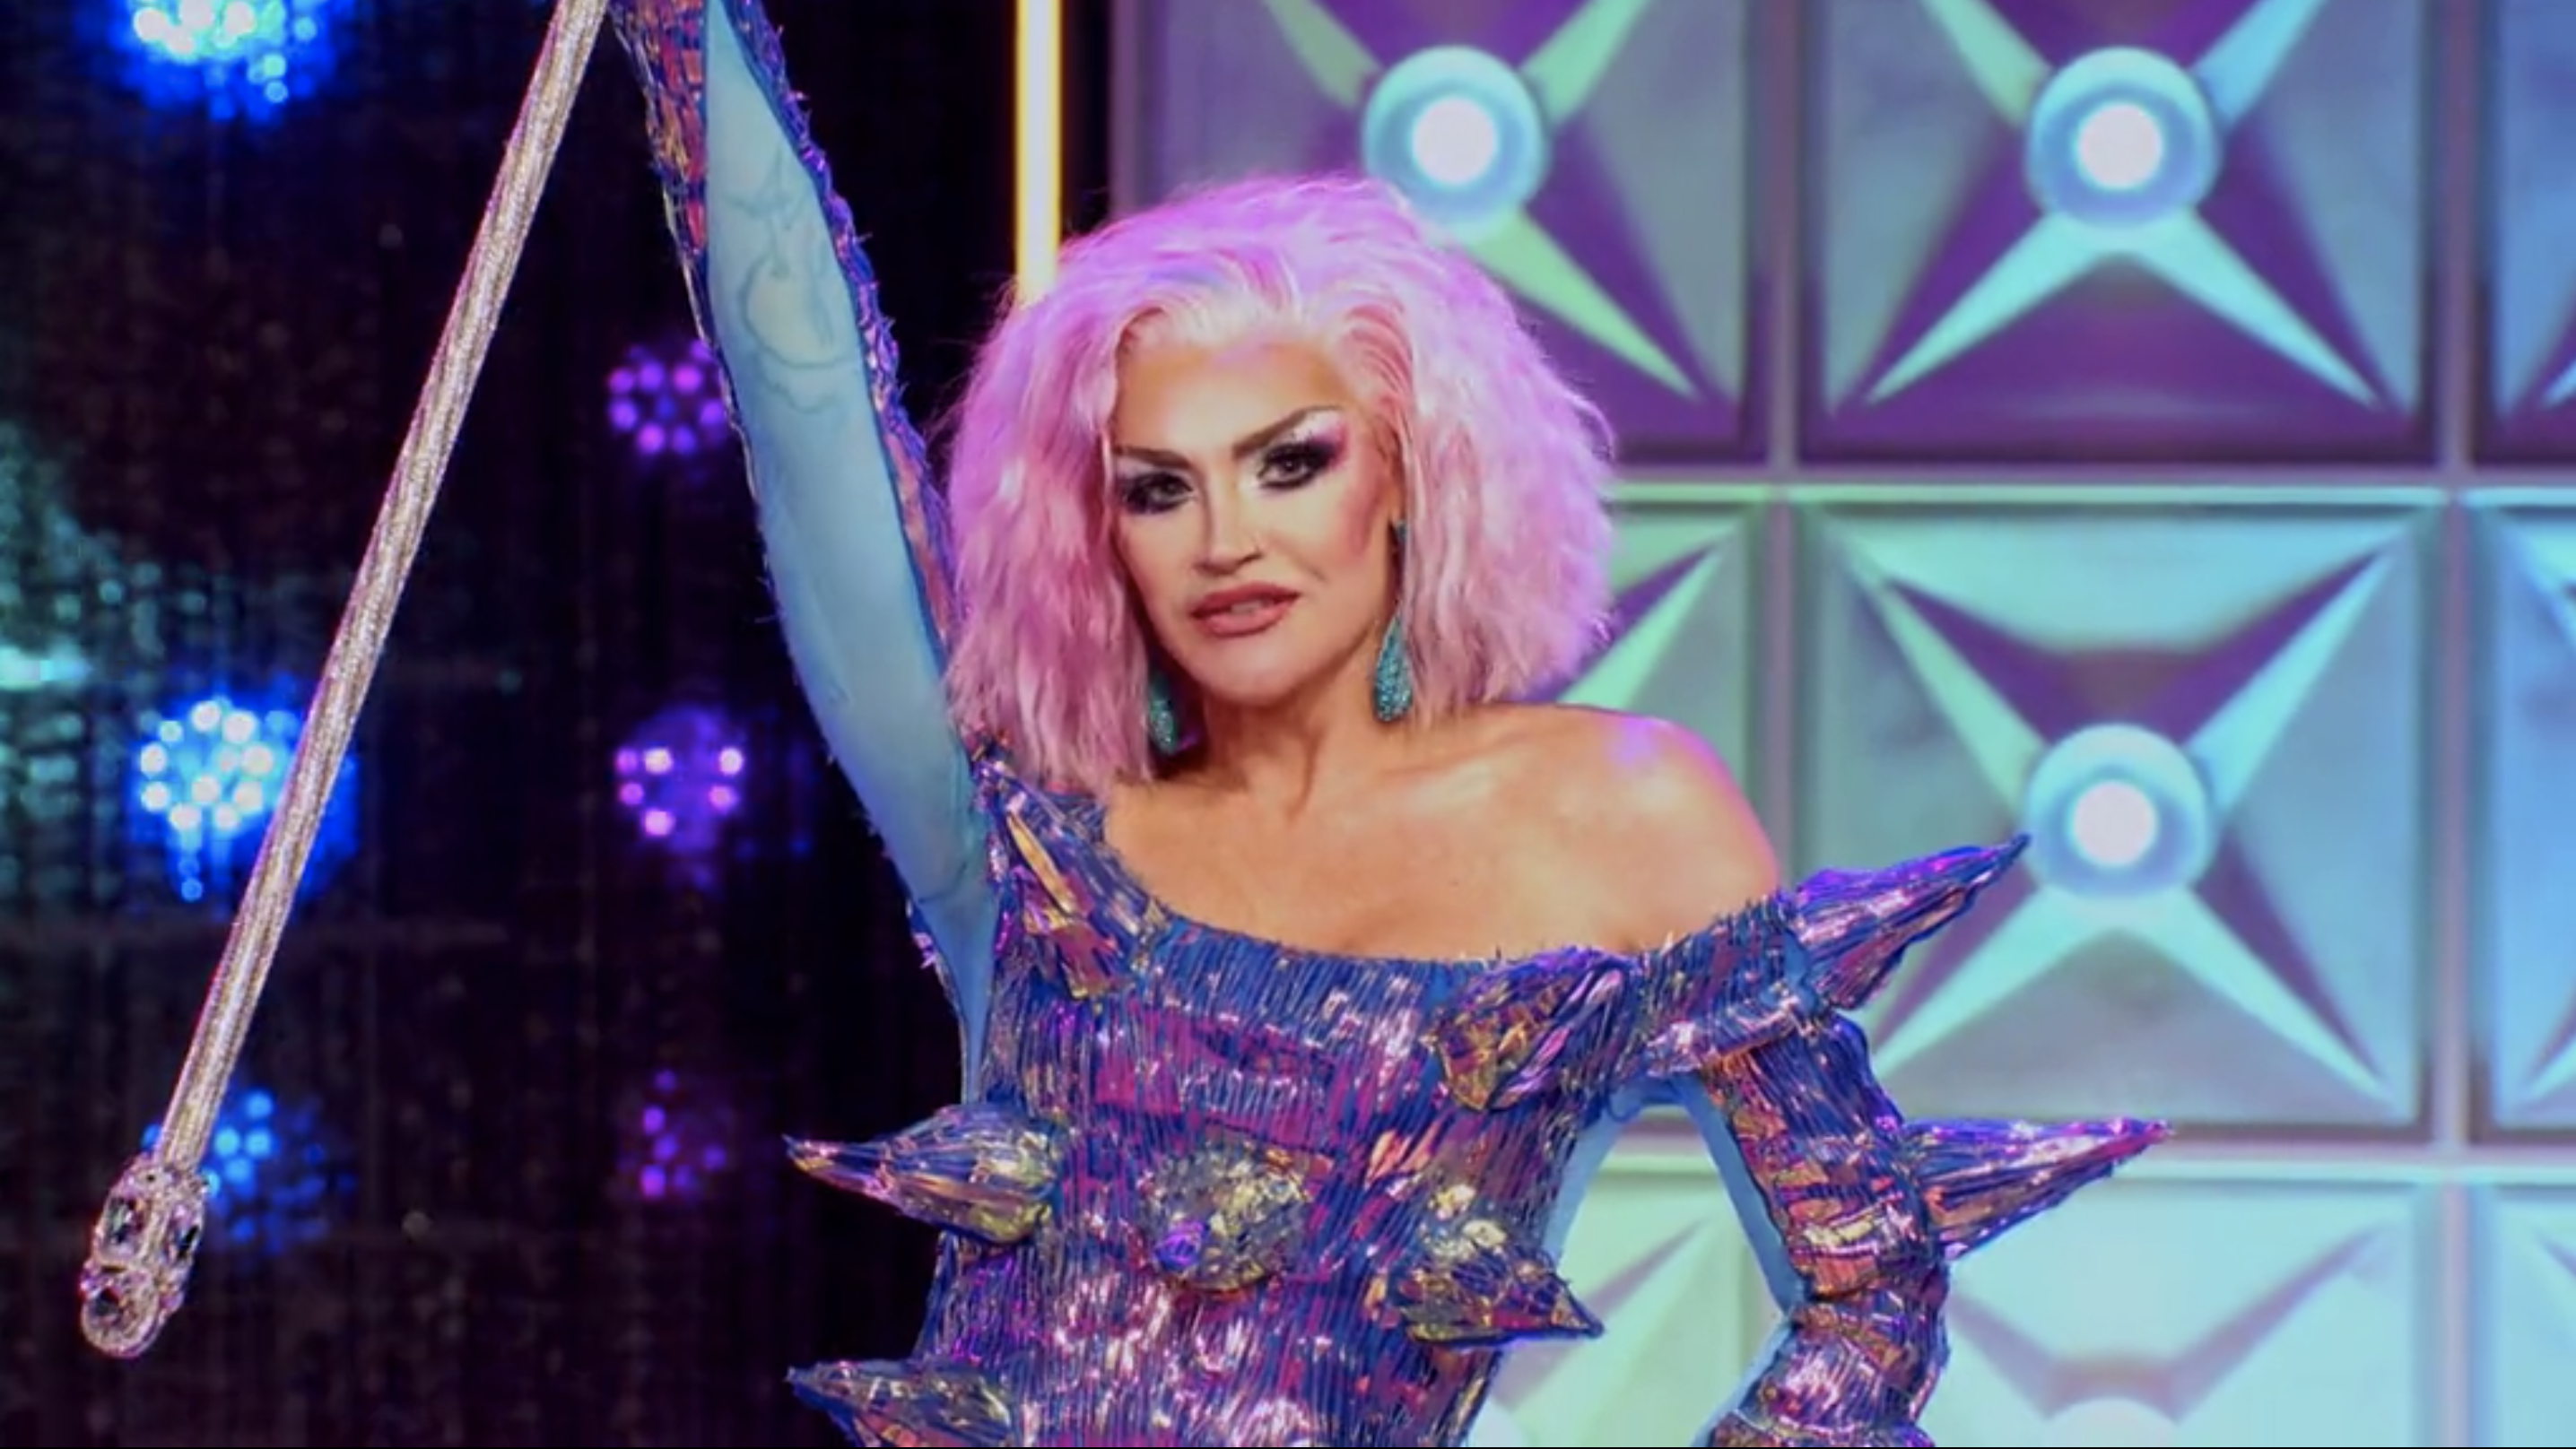 Drag Race All Stars 6 winner Kylie Sonique Love reveals what was going through her head during that tumble